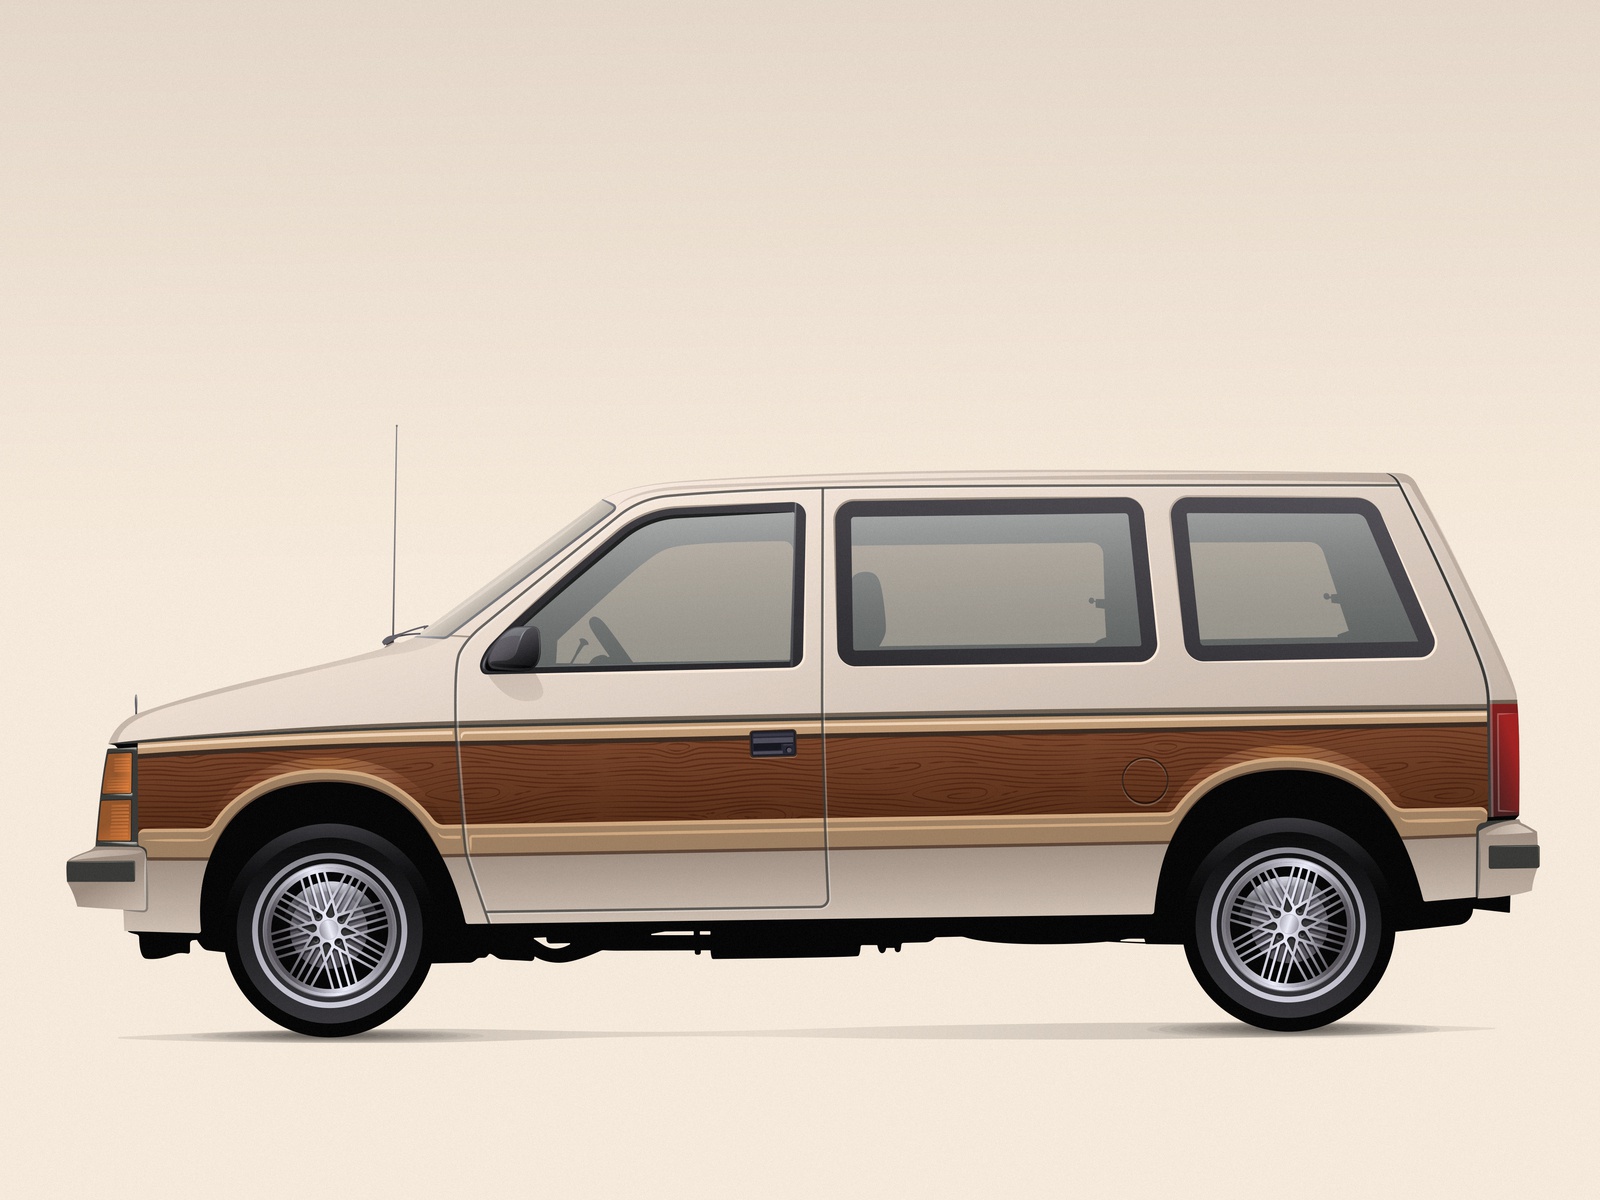 84 Plymouth Voyager by Tony Green on Dribbble